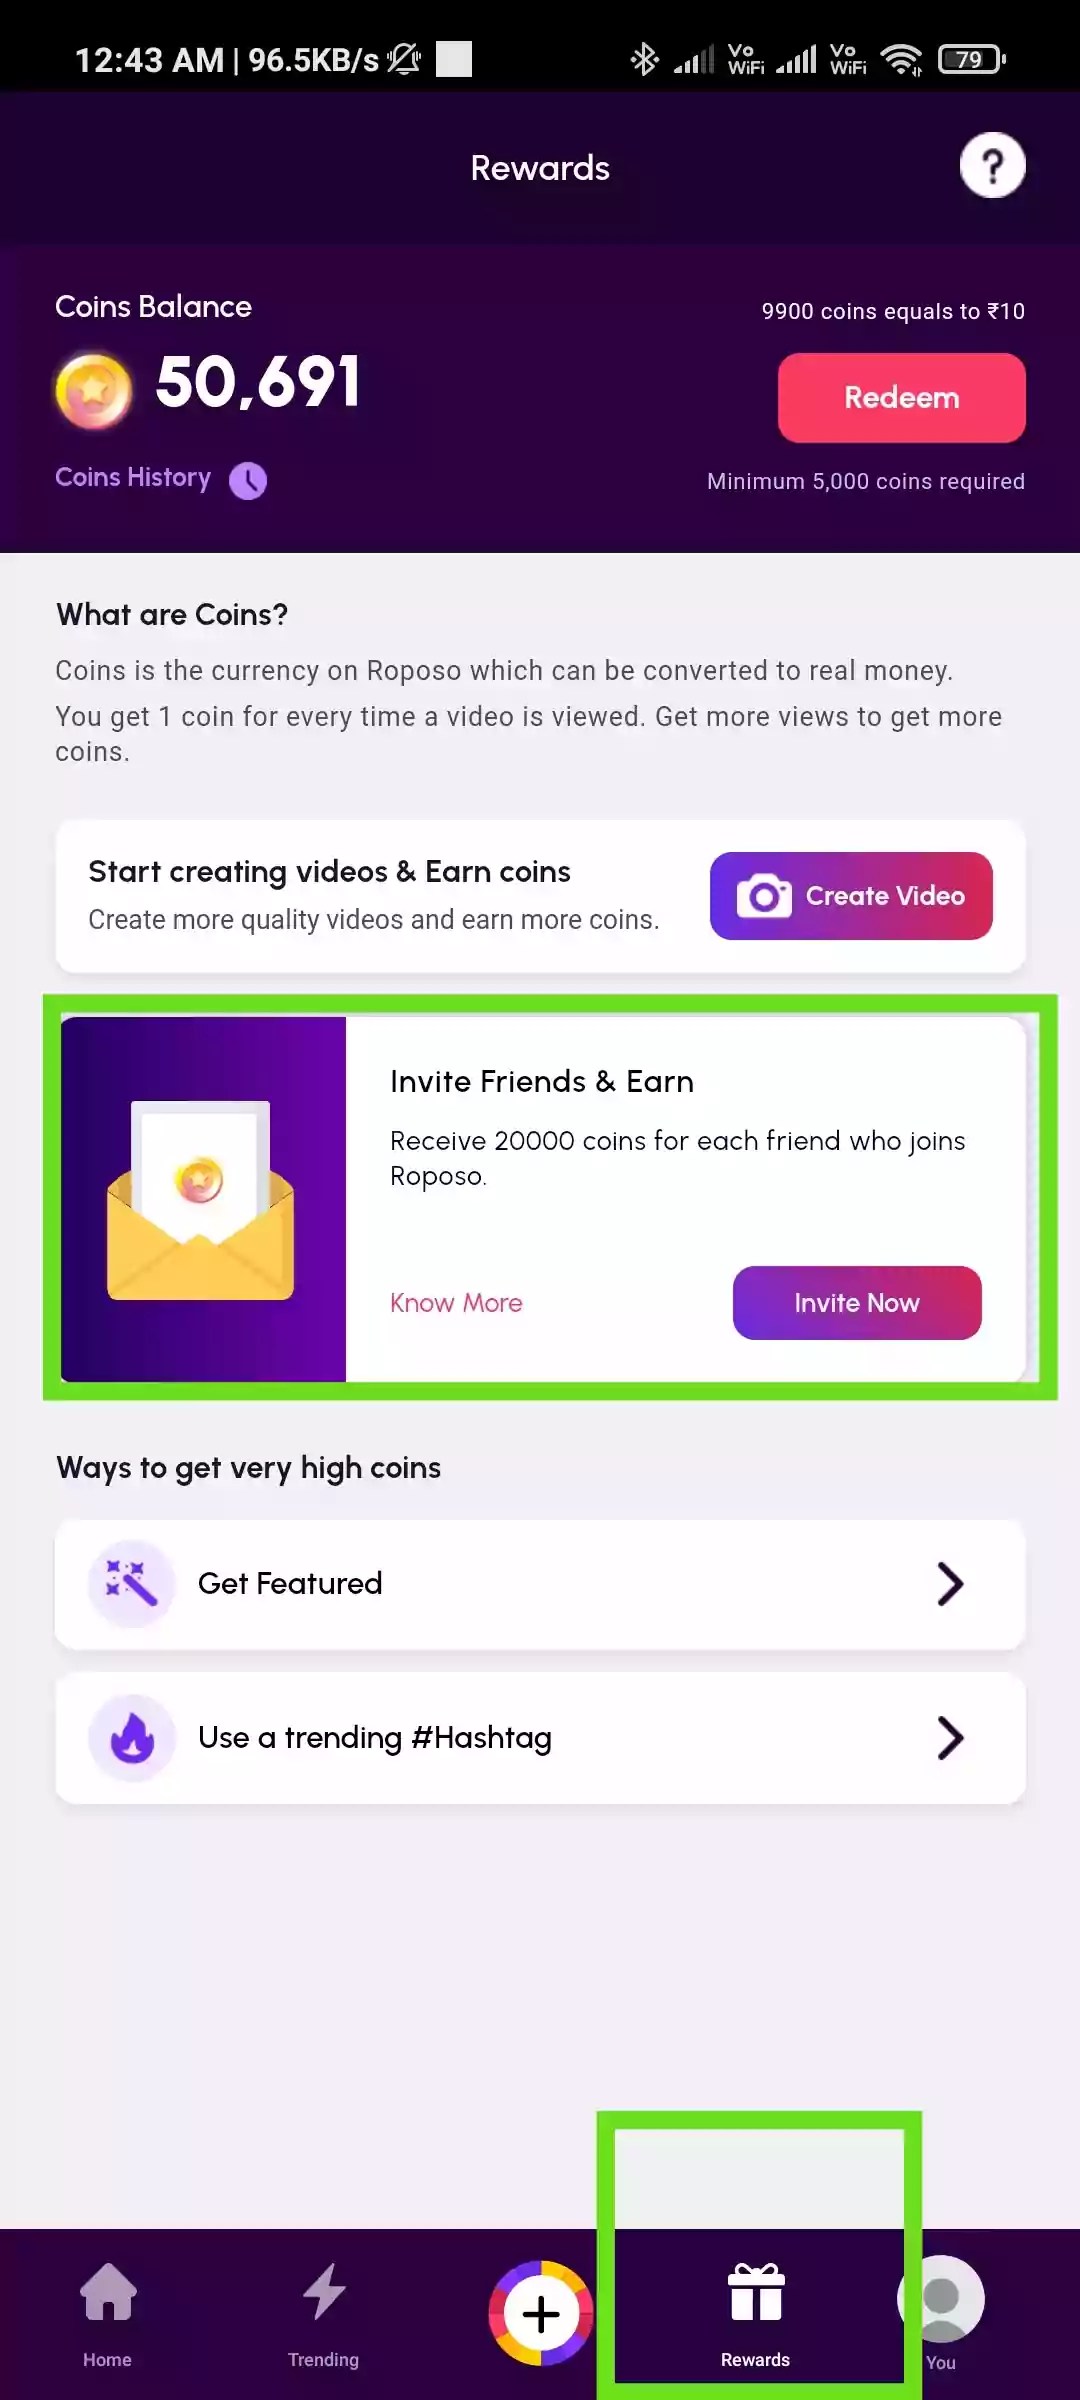 How To Get ₹20 Refer & Earn In Paytm Cash for Roposo App Loot